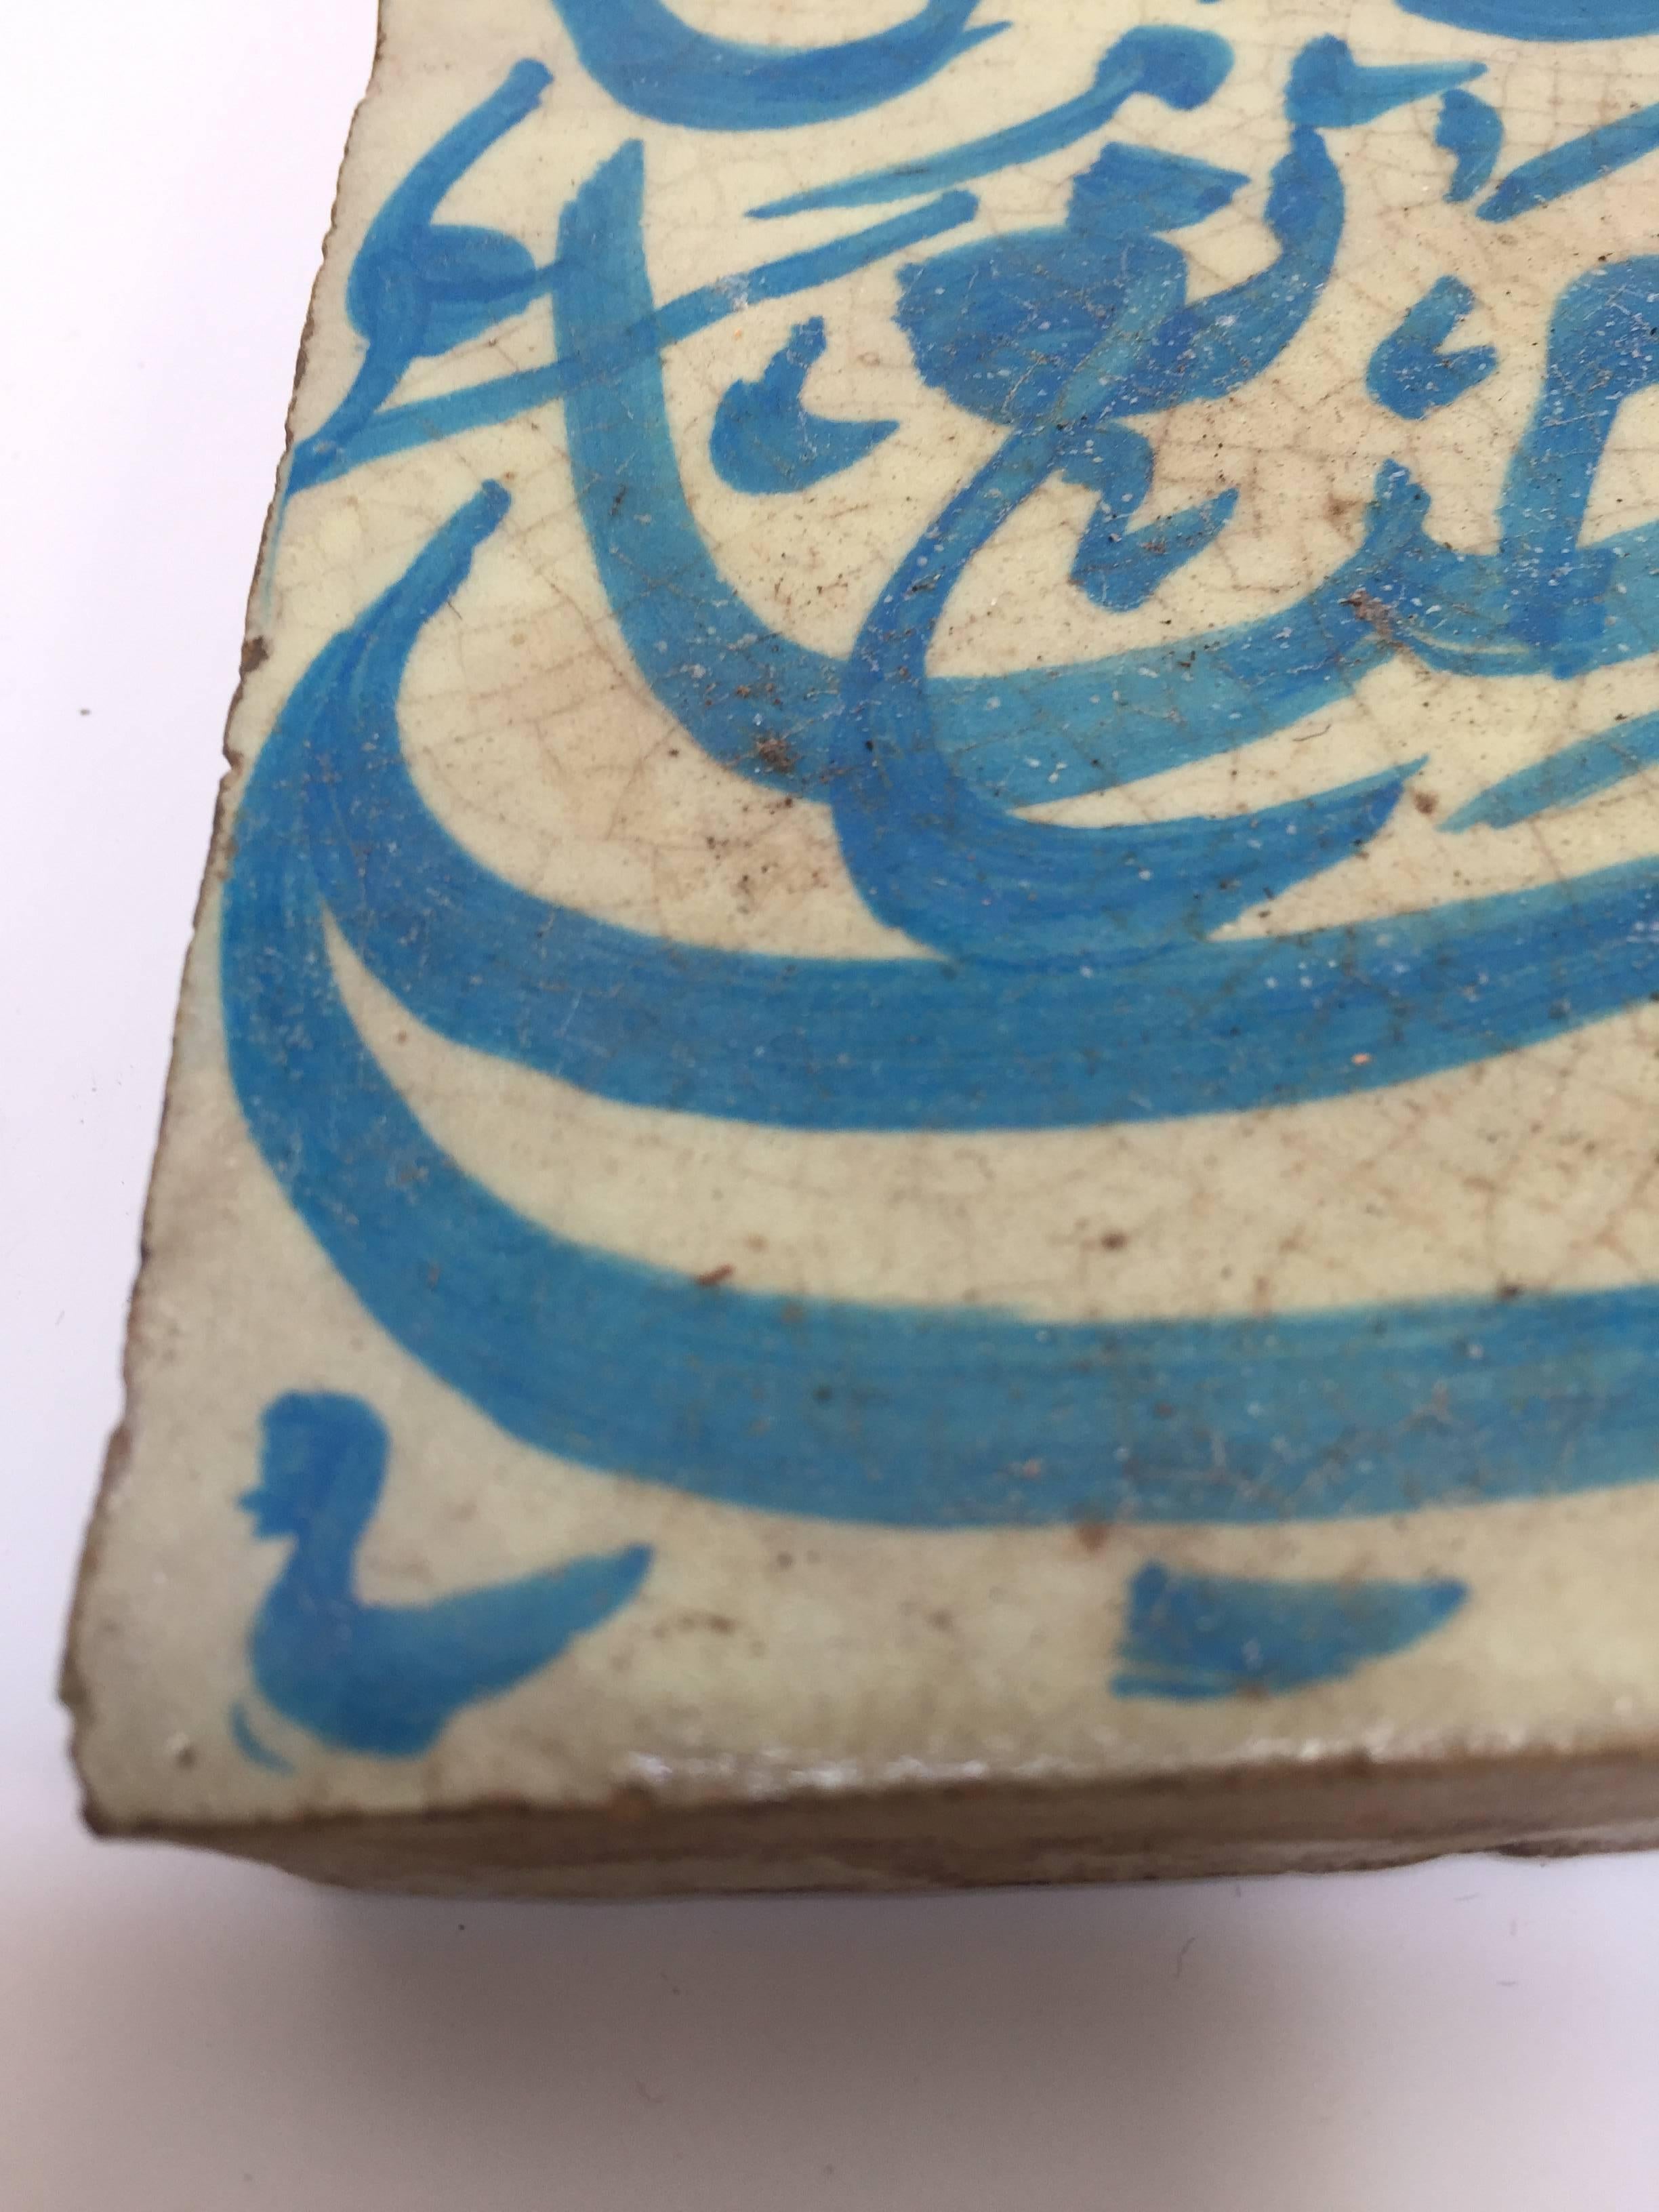 Moroccan handcrafted decorative tile with Arabic writing in turquoise blue on ivory crackle glazed ceramic.
Arabic poetry words on ceramic tile hand-painted by artist in Fez Morocco.
Great decorative Moorish artwork.
Tile is 5.75